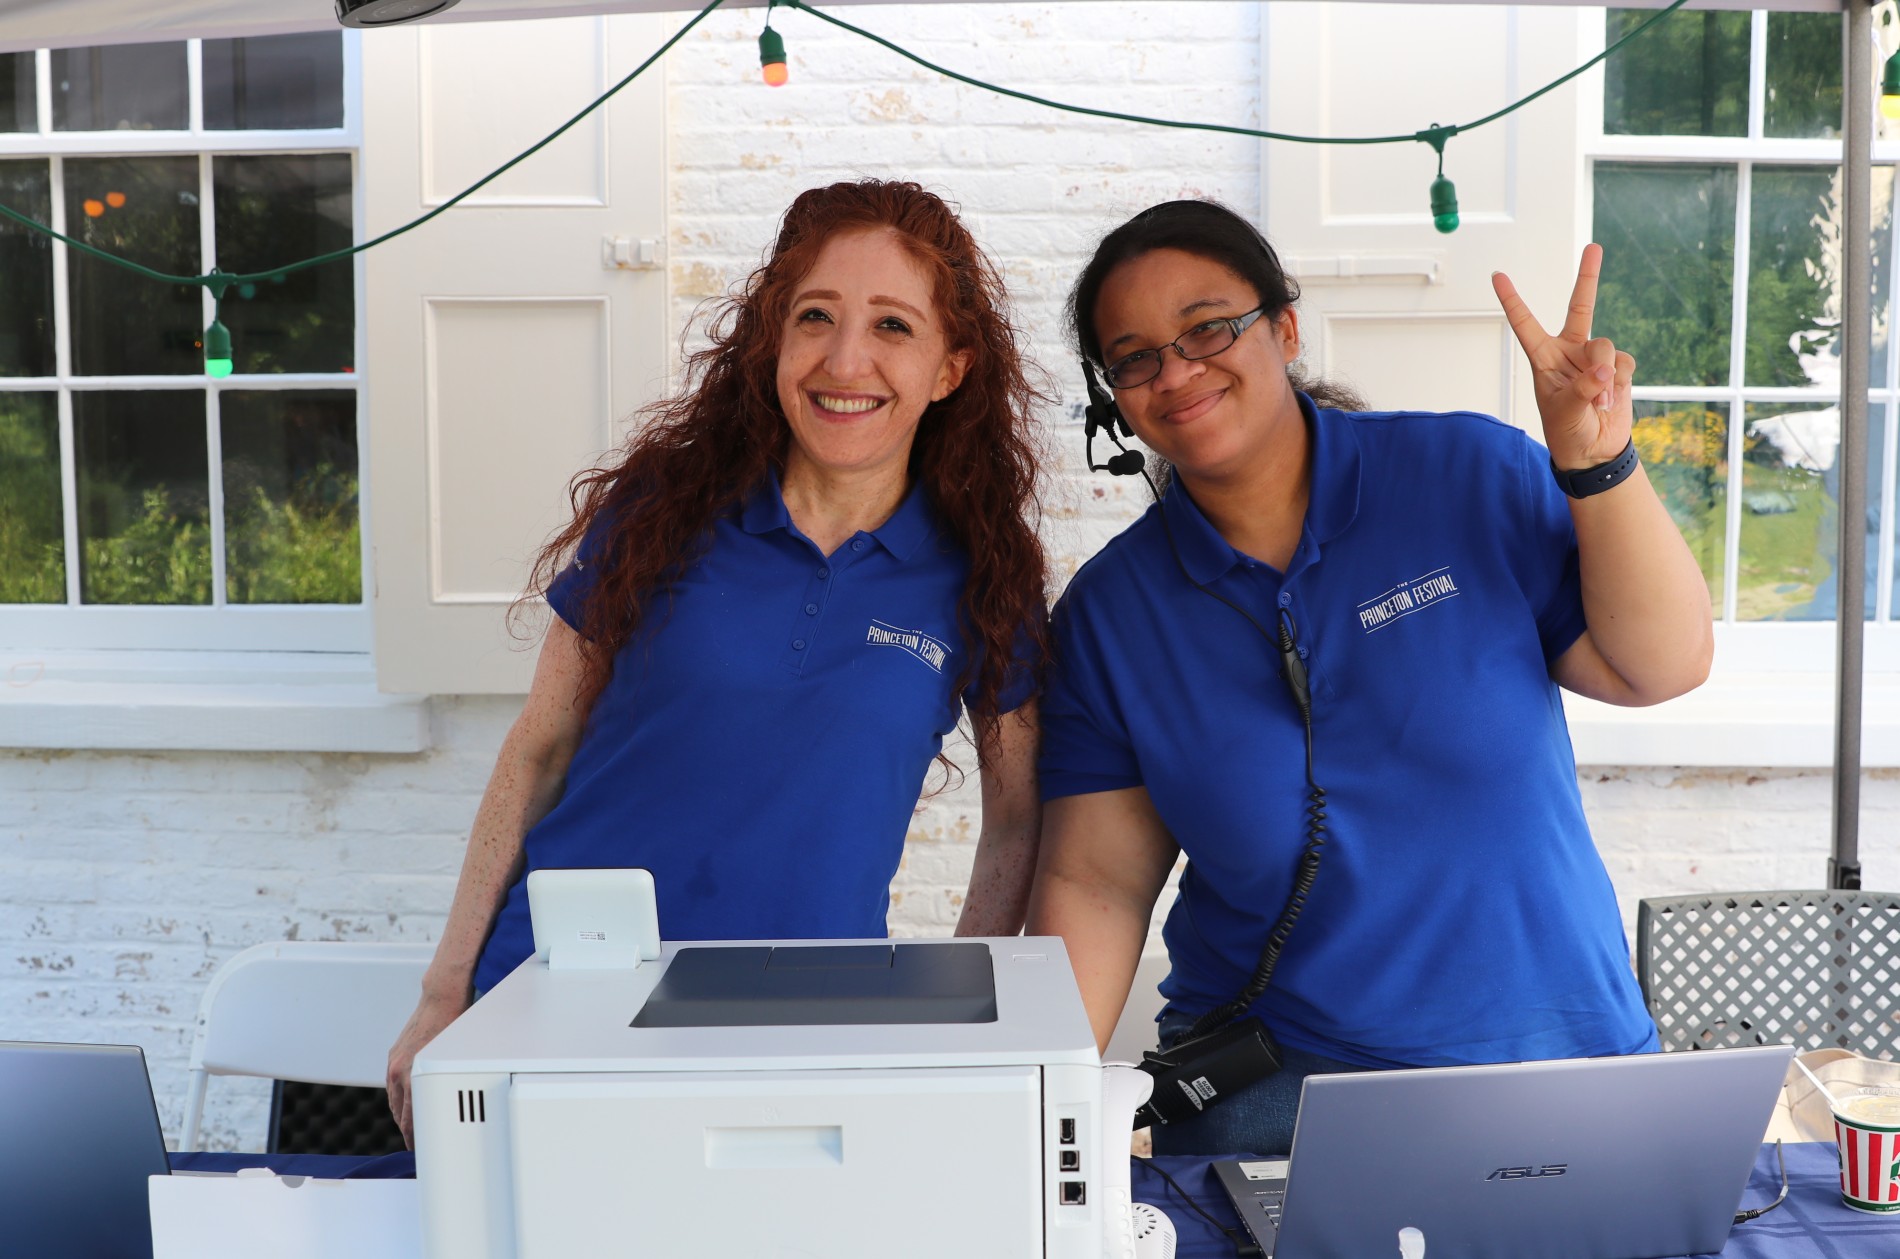 Box office workers for Festival 2022